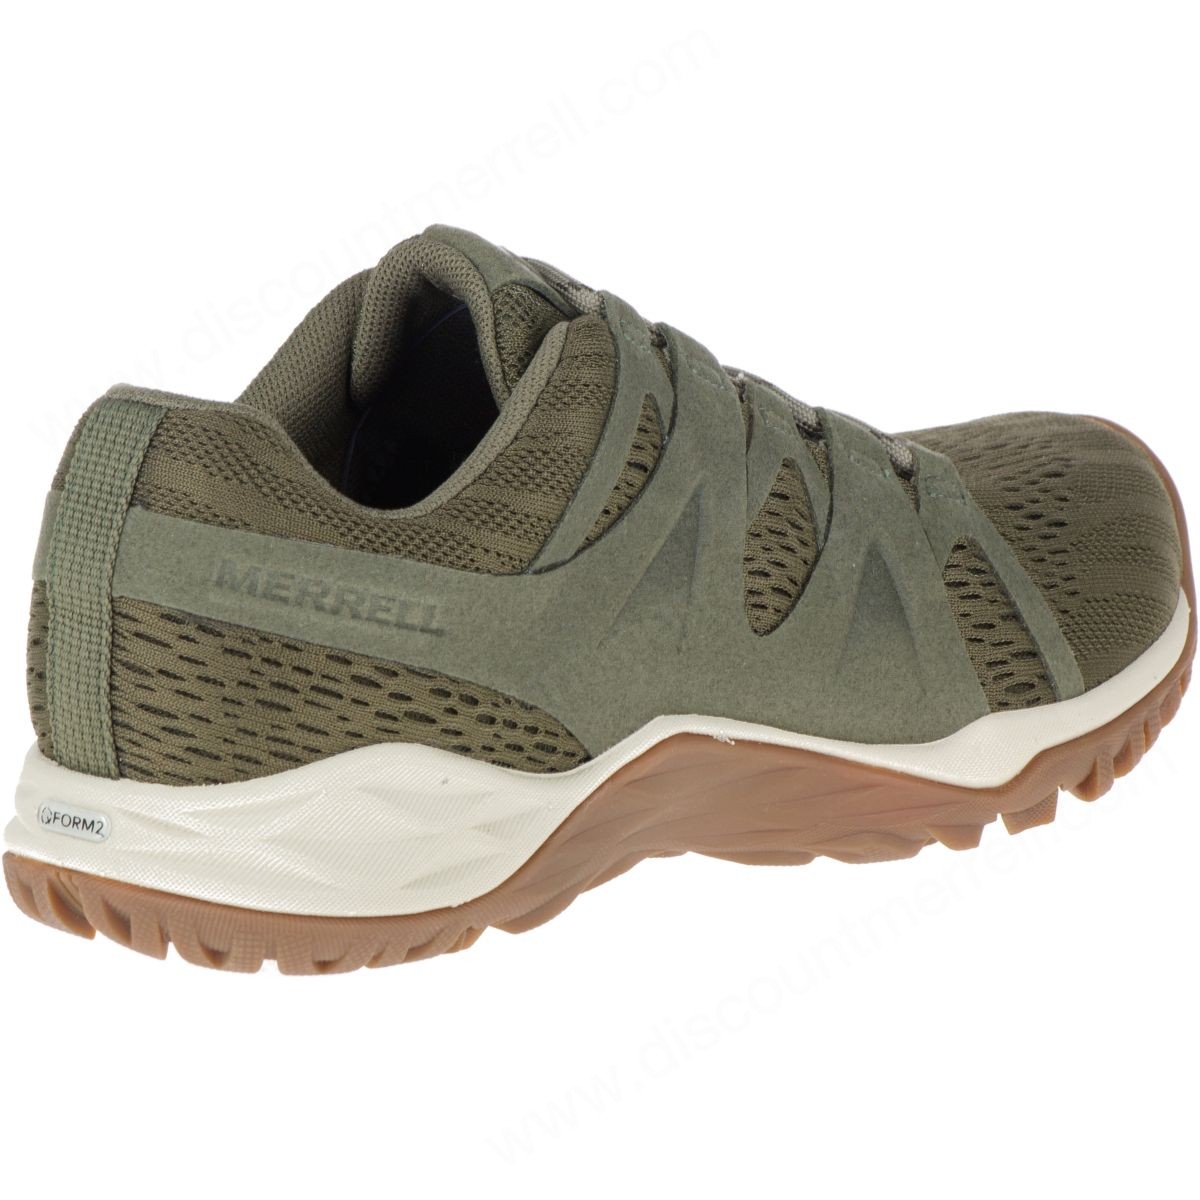 Merrell Lady's Siren Guided Lace Q2 Dusty Olive - -7